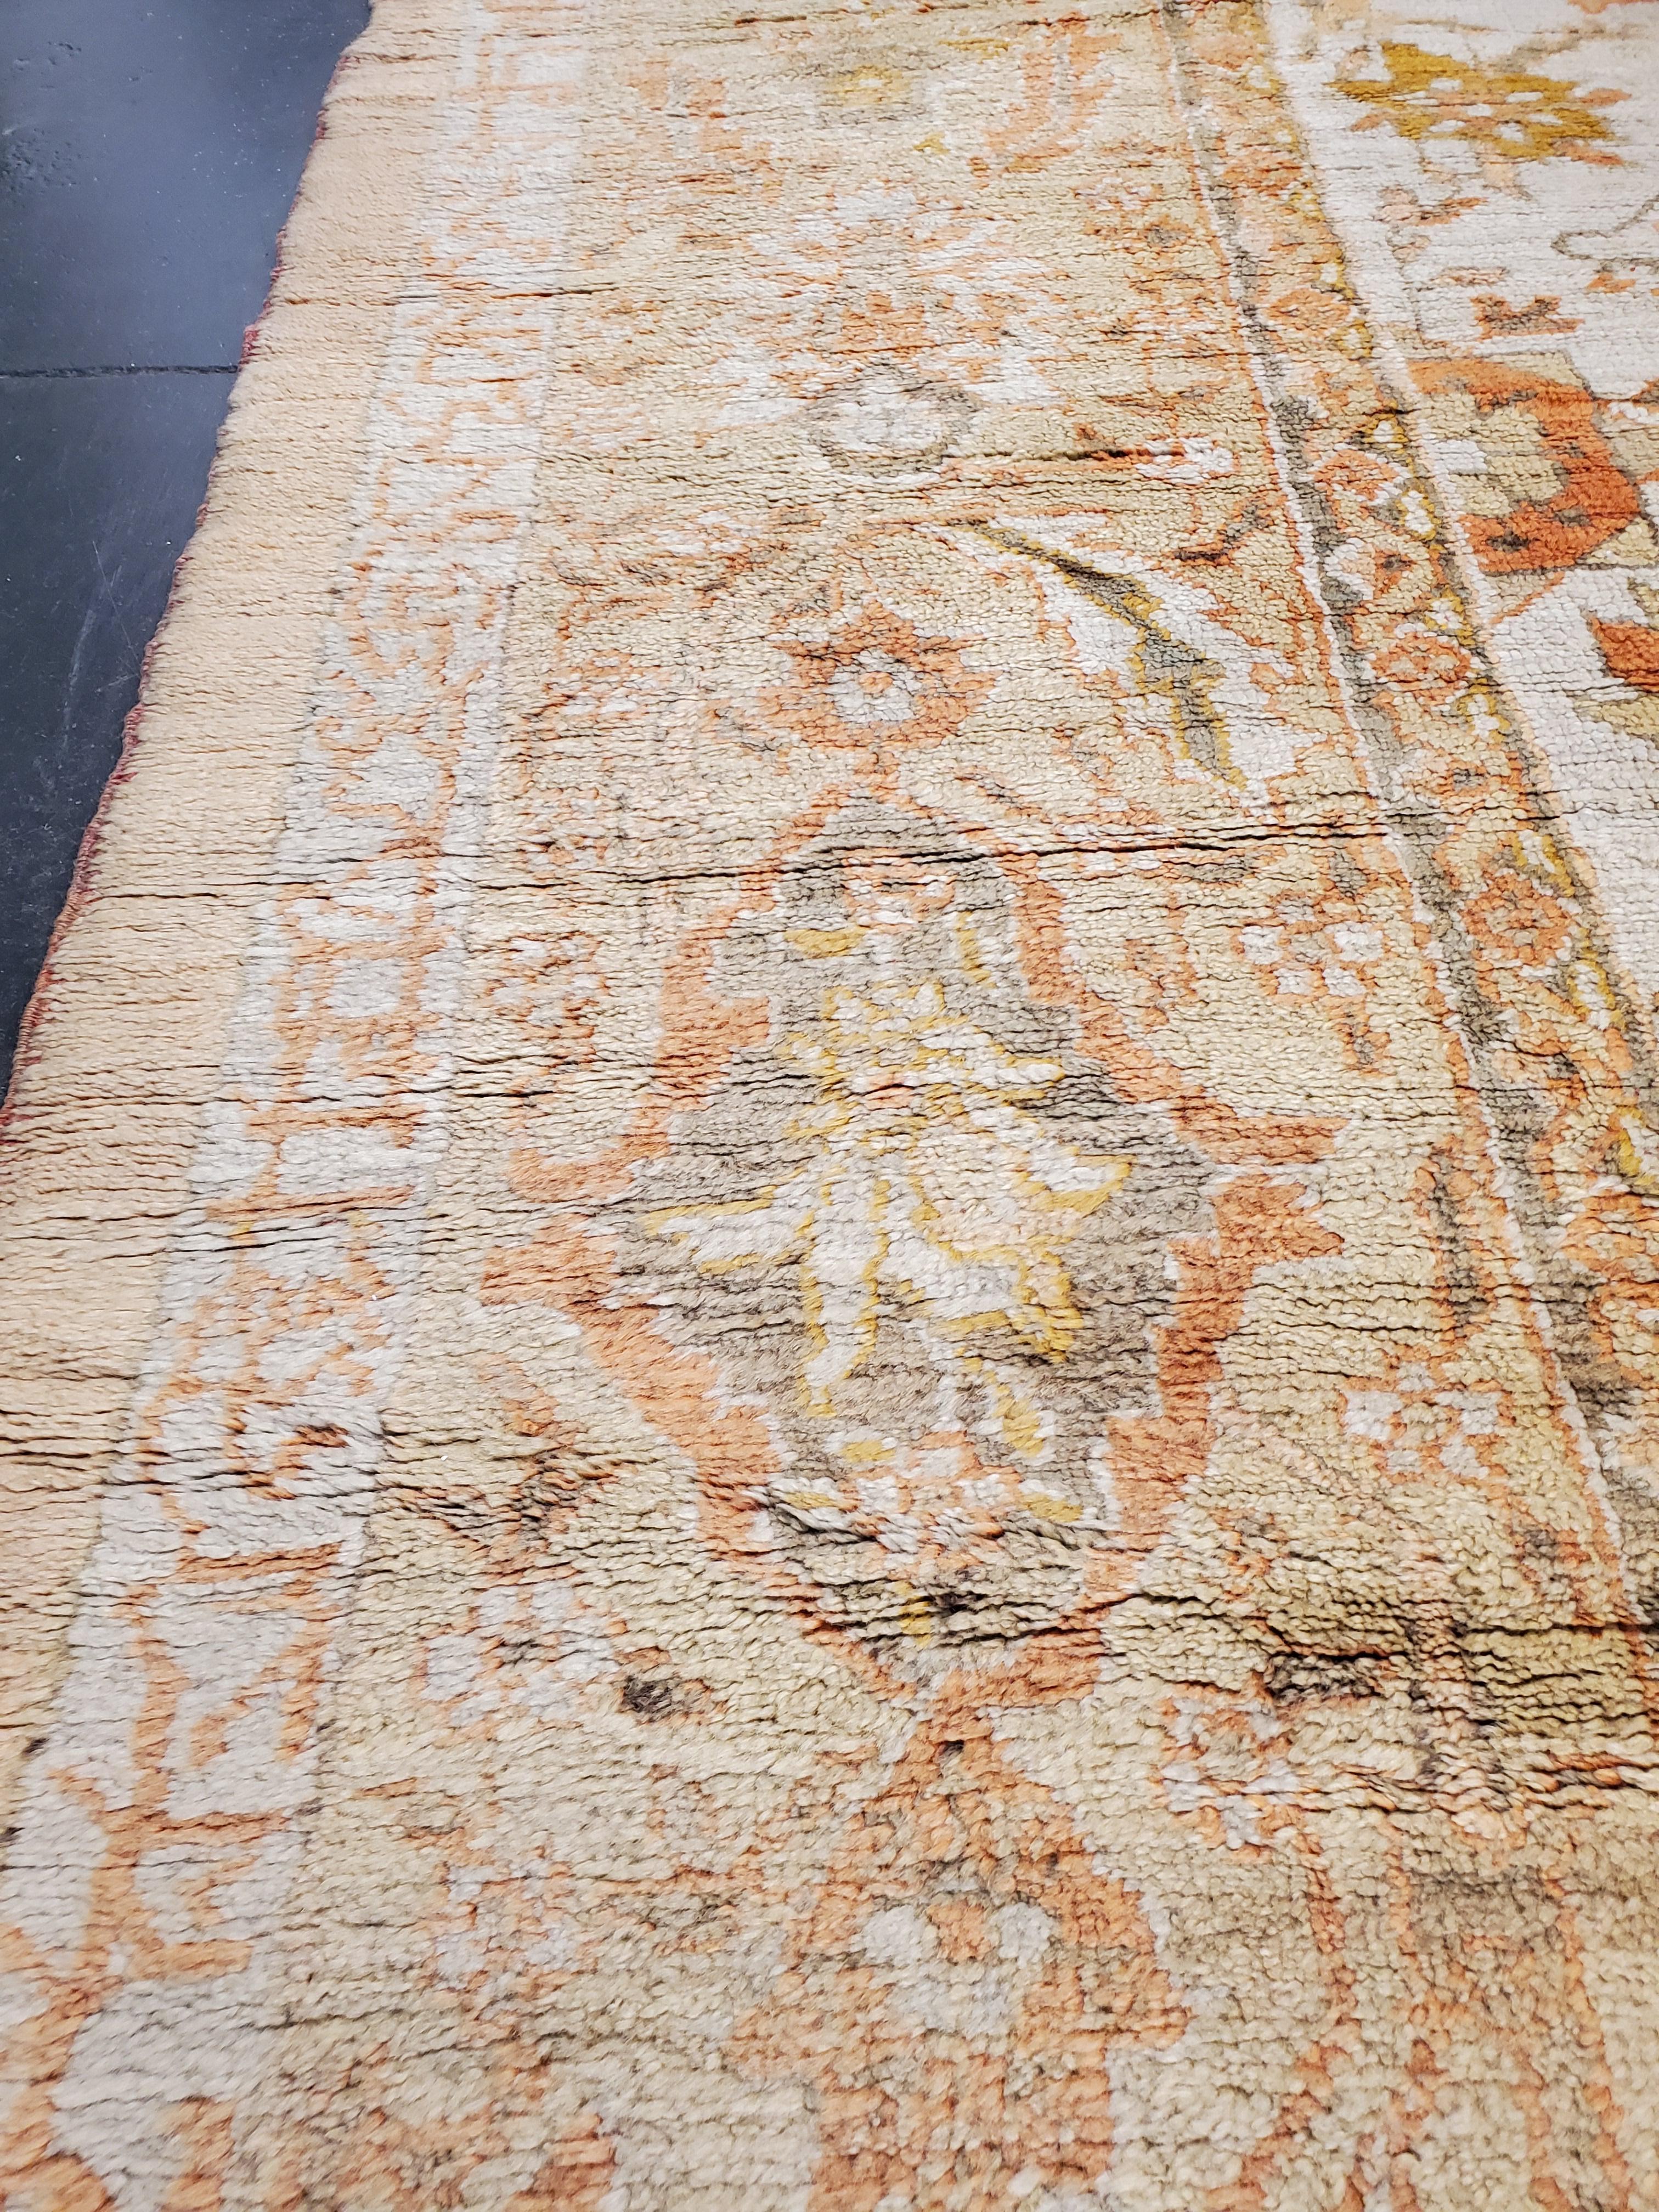 Antique Oushak Carpet, Handmade Oriental Rug, Ivory Field, Coral, Gray, Soft  In Excellent Condition For Sale In Port Washington, NY